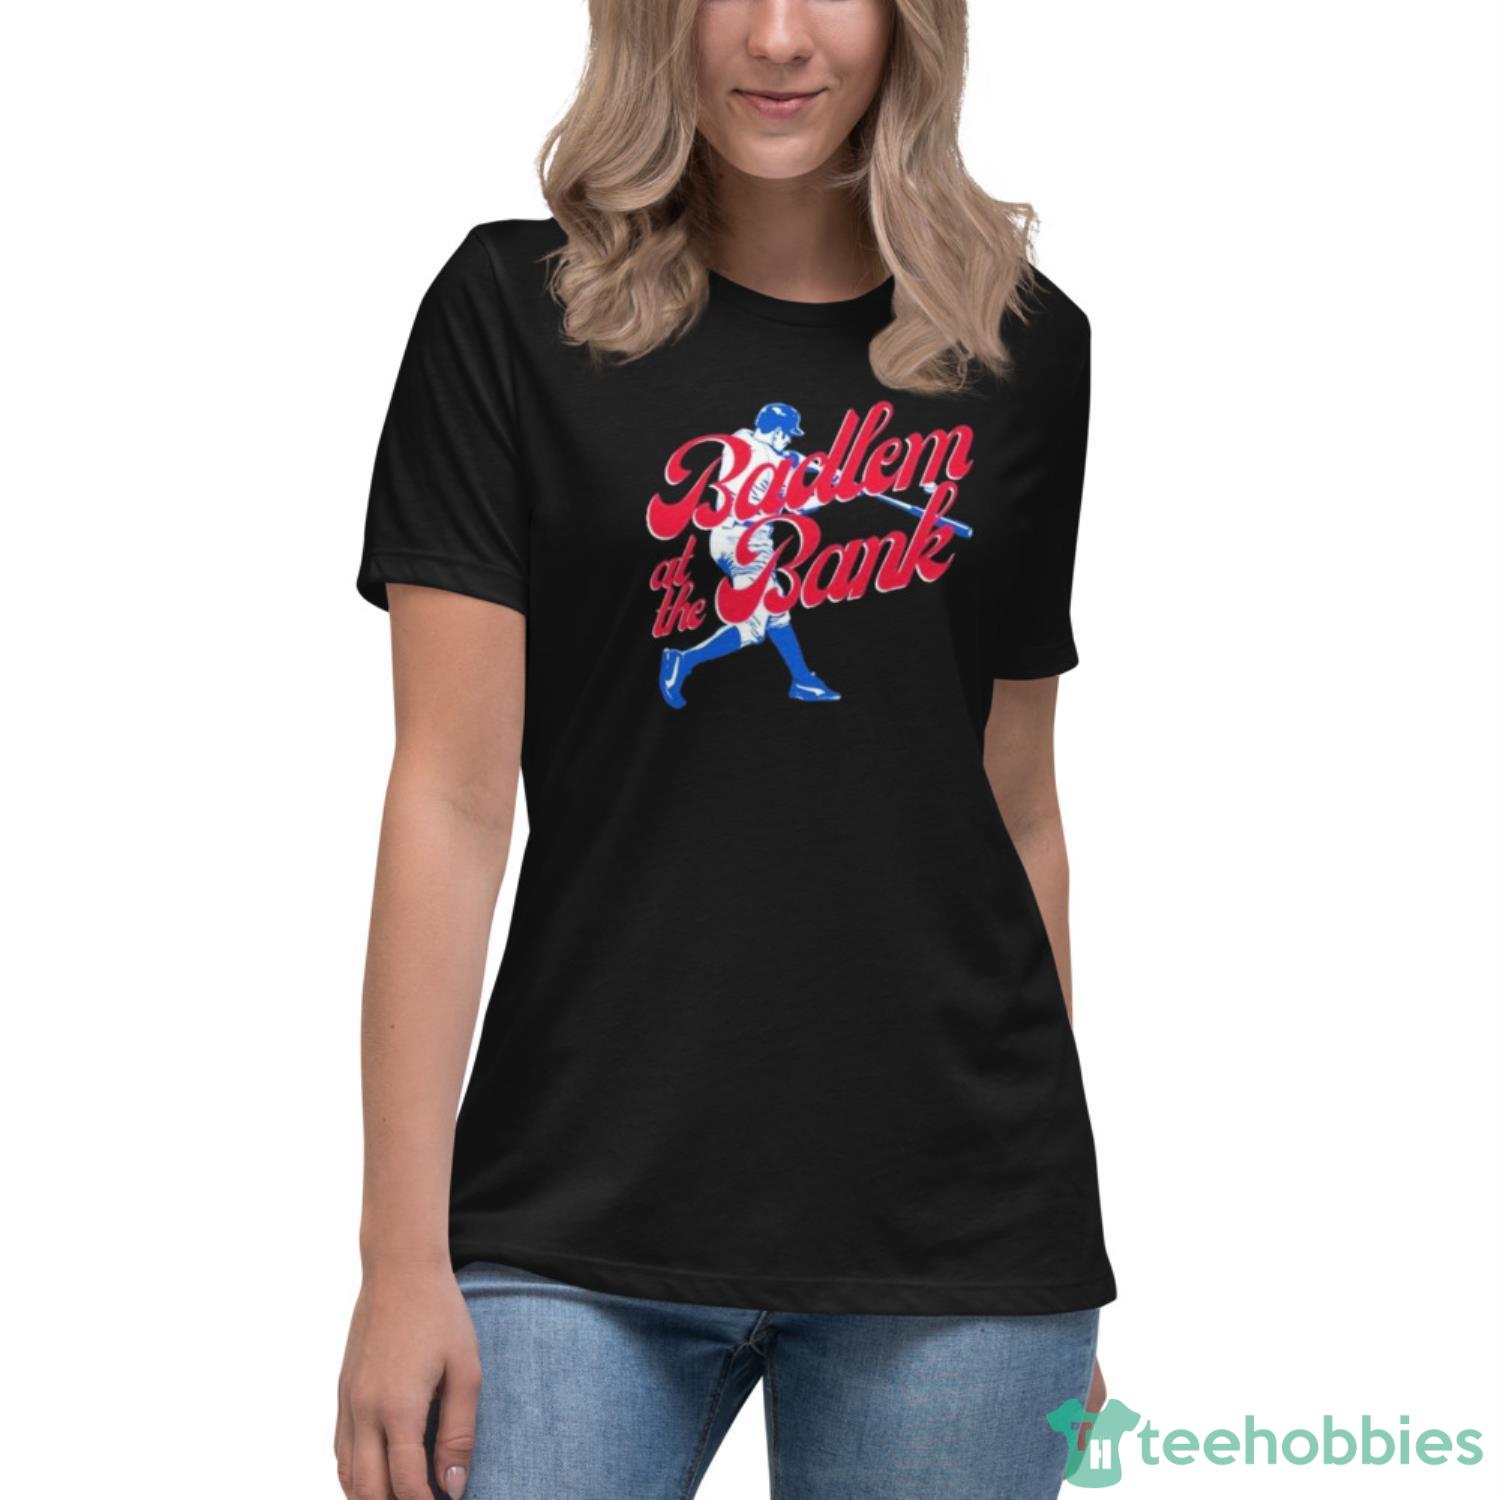 Philly Bedlam At The Bank Philadelphia Phillies Baseball T-Shirt - Womens Relaxed Short Sleeve Jersey Tee